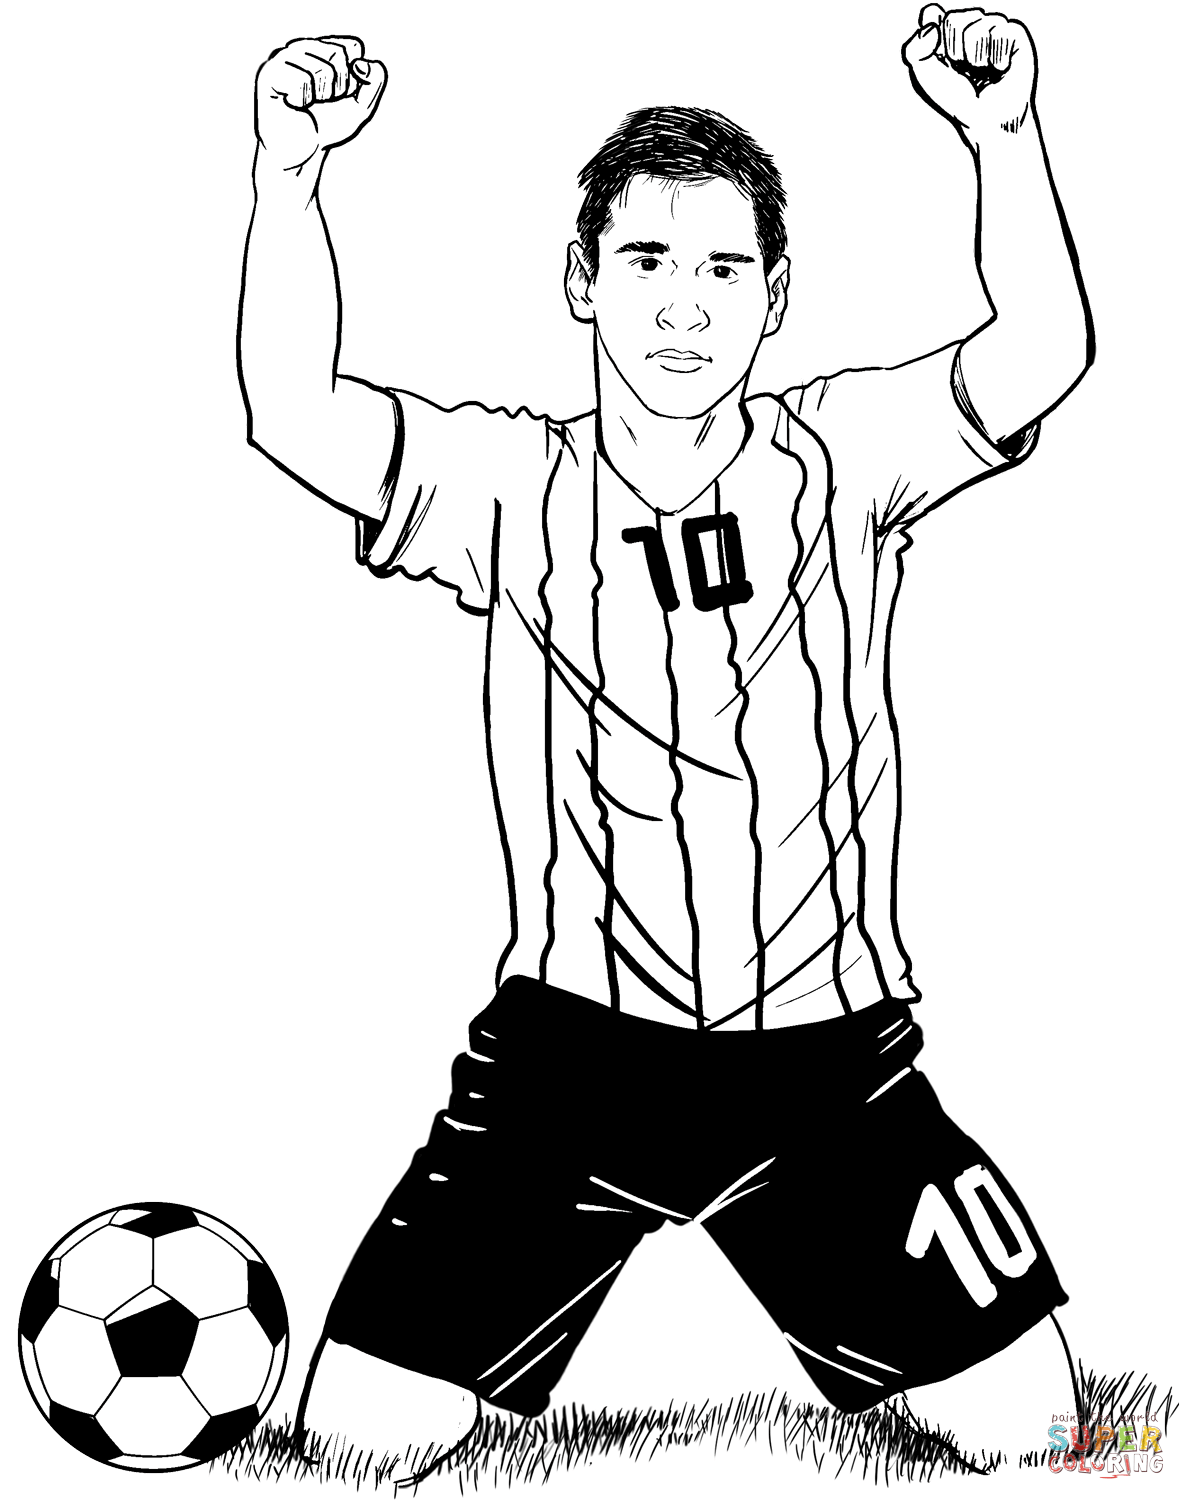 Lionel Messi Coloring Page. Free Printable Coloring Page - Coloring Home